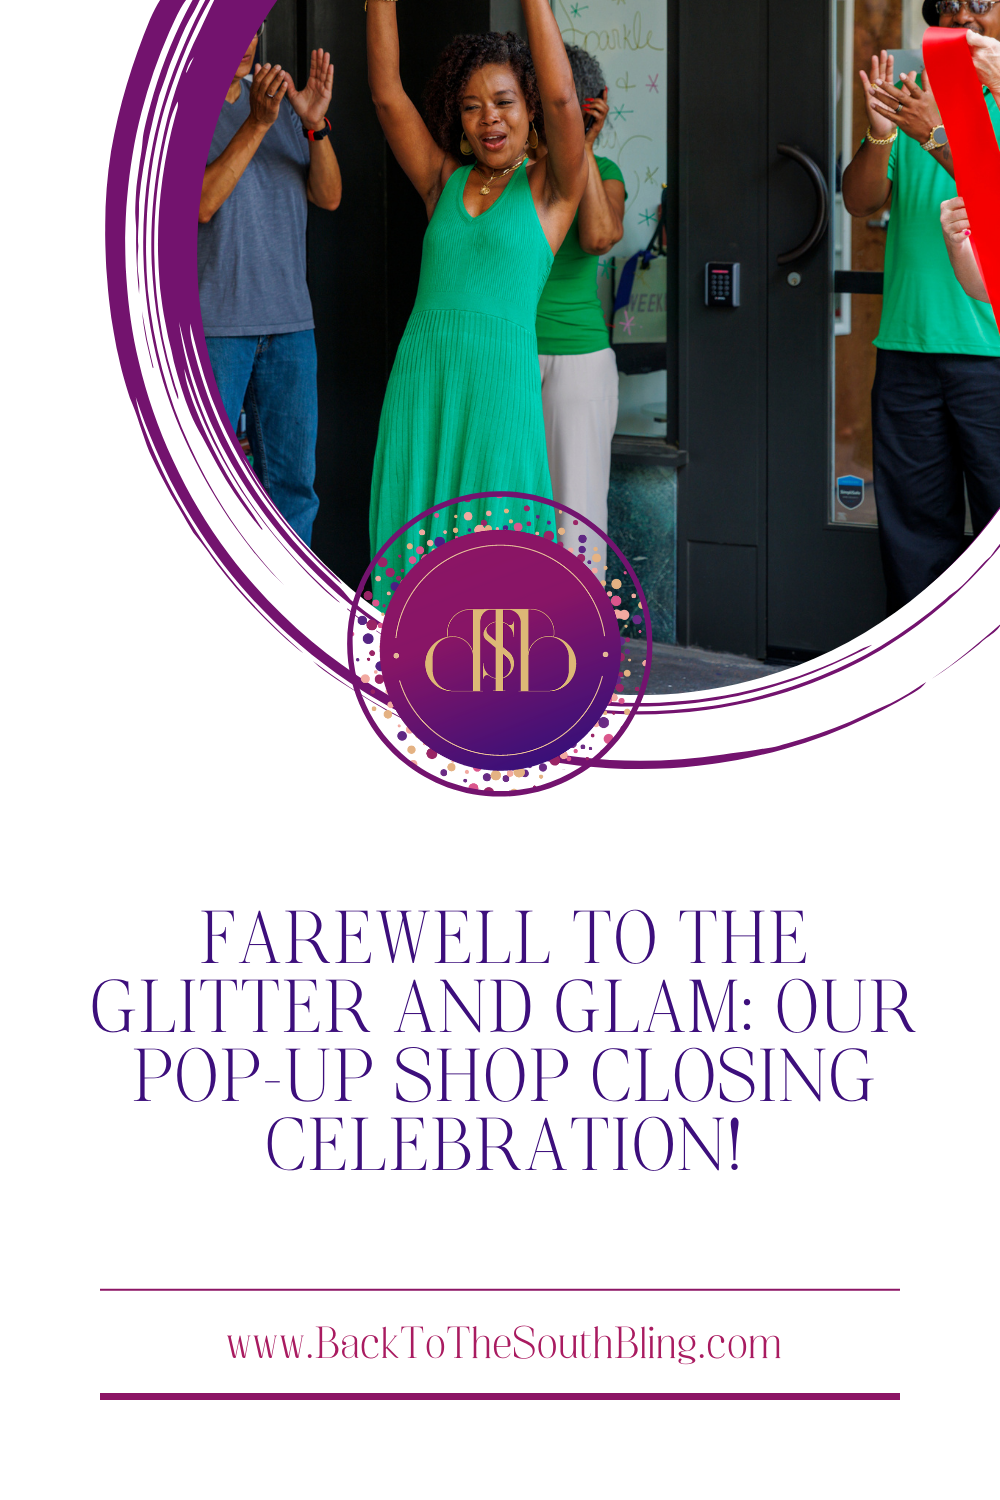 Farewell to the Glitter and Glam: Our Pop-Up Shop Closing Celebration!